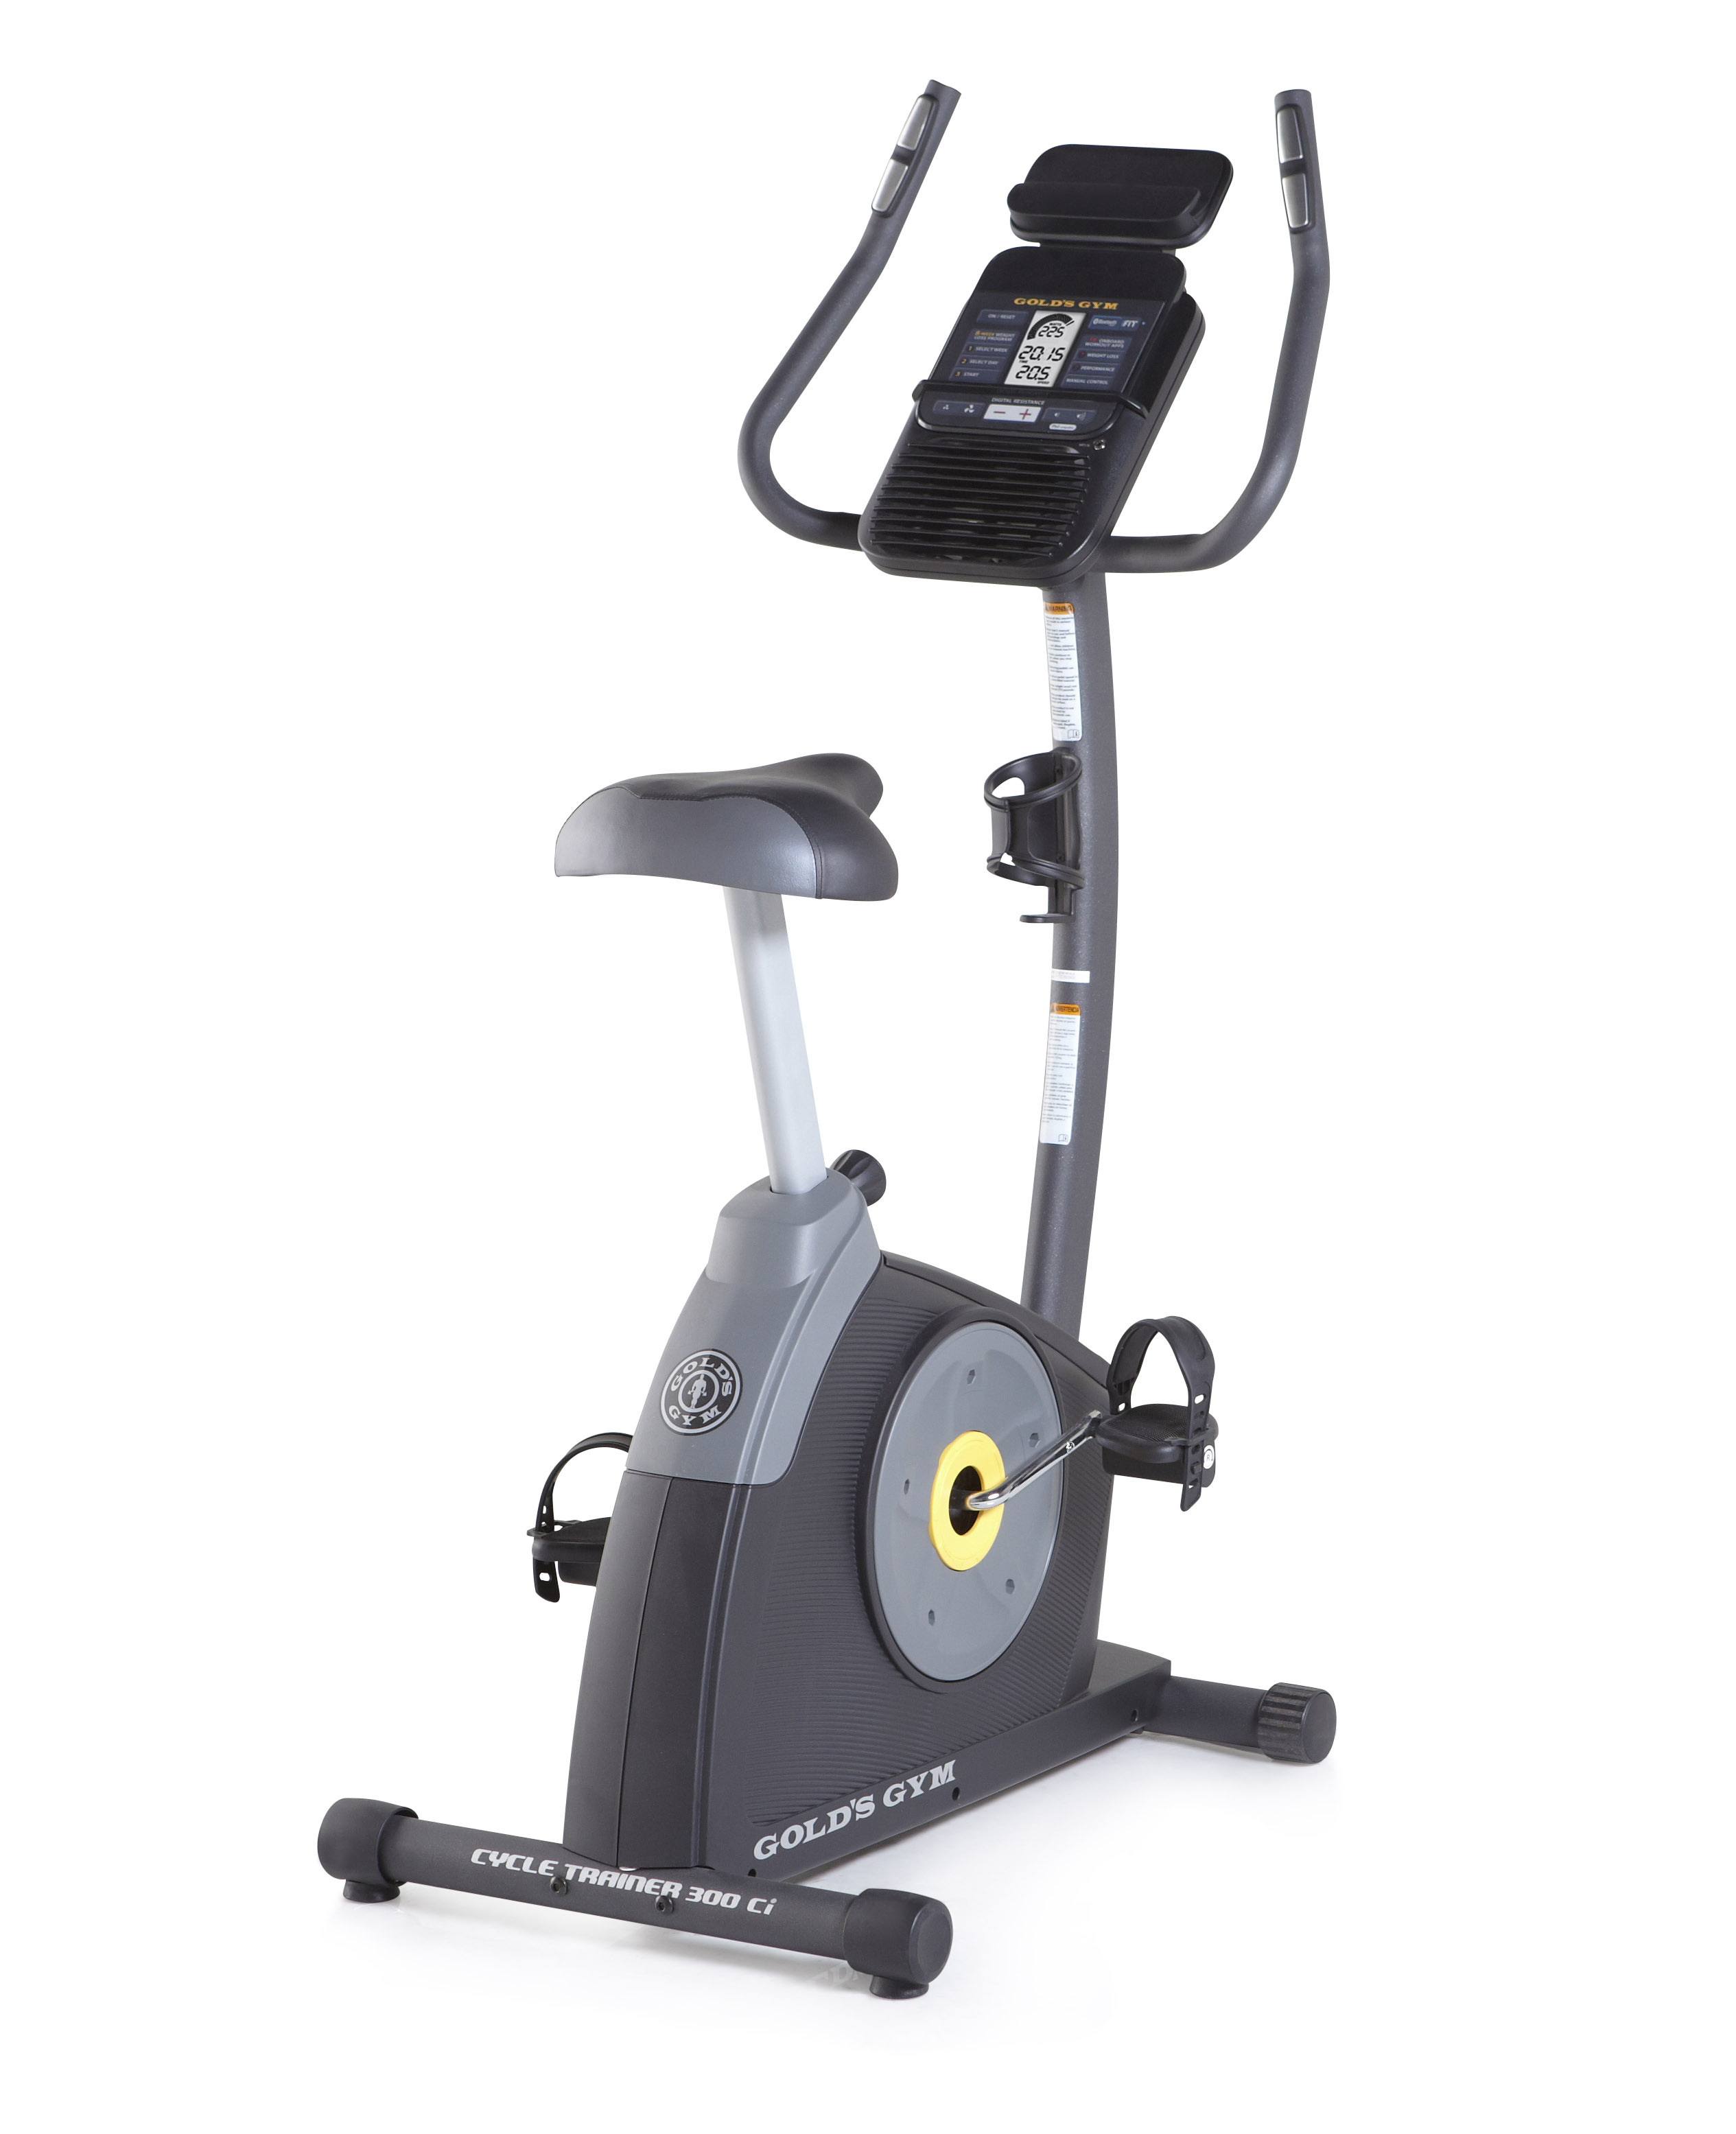 Gold's Gym Cycle Trainer 300 Ci Upright Exercise Bike - iFit Compatible - image 1 of 4